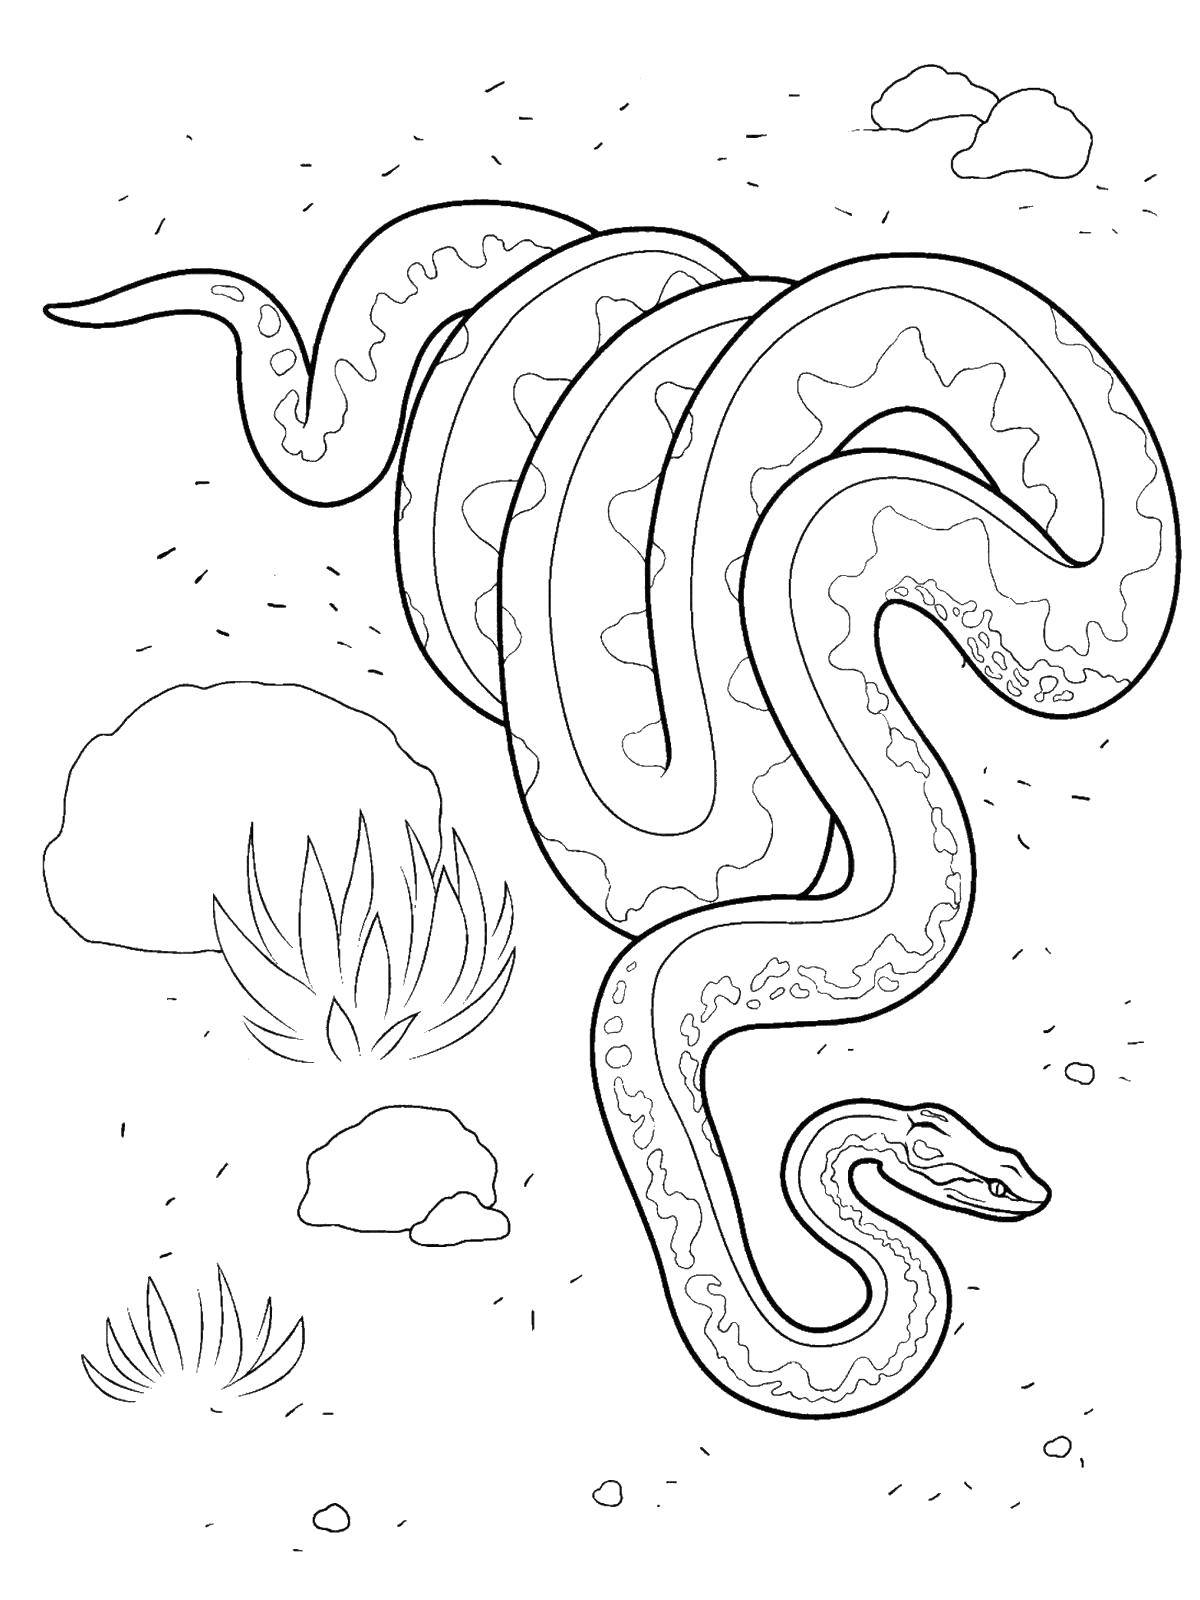 Coloring Snake. Category reptiles. Tags:  Reptile, snake.